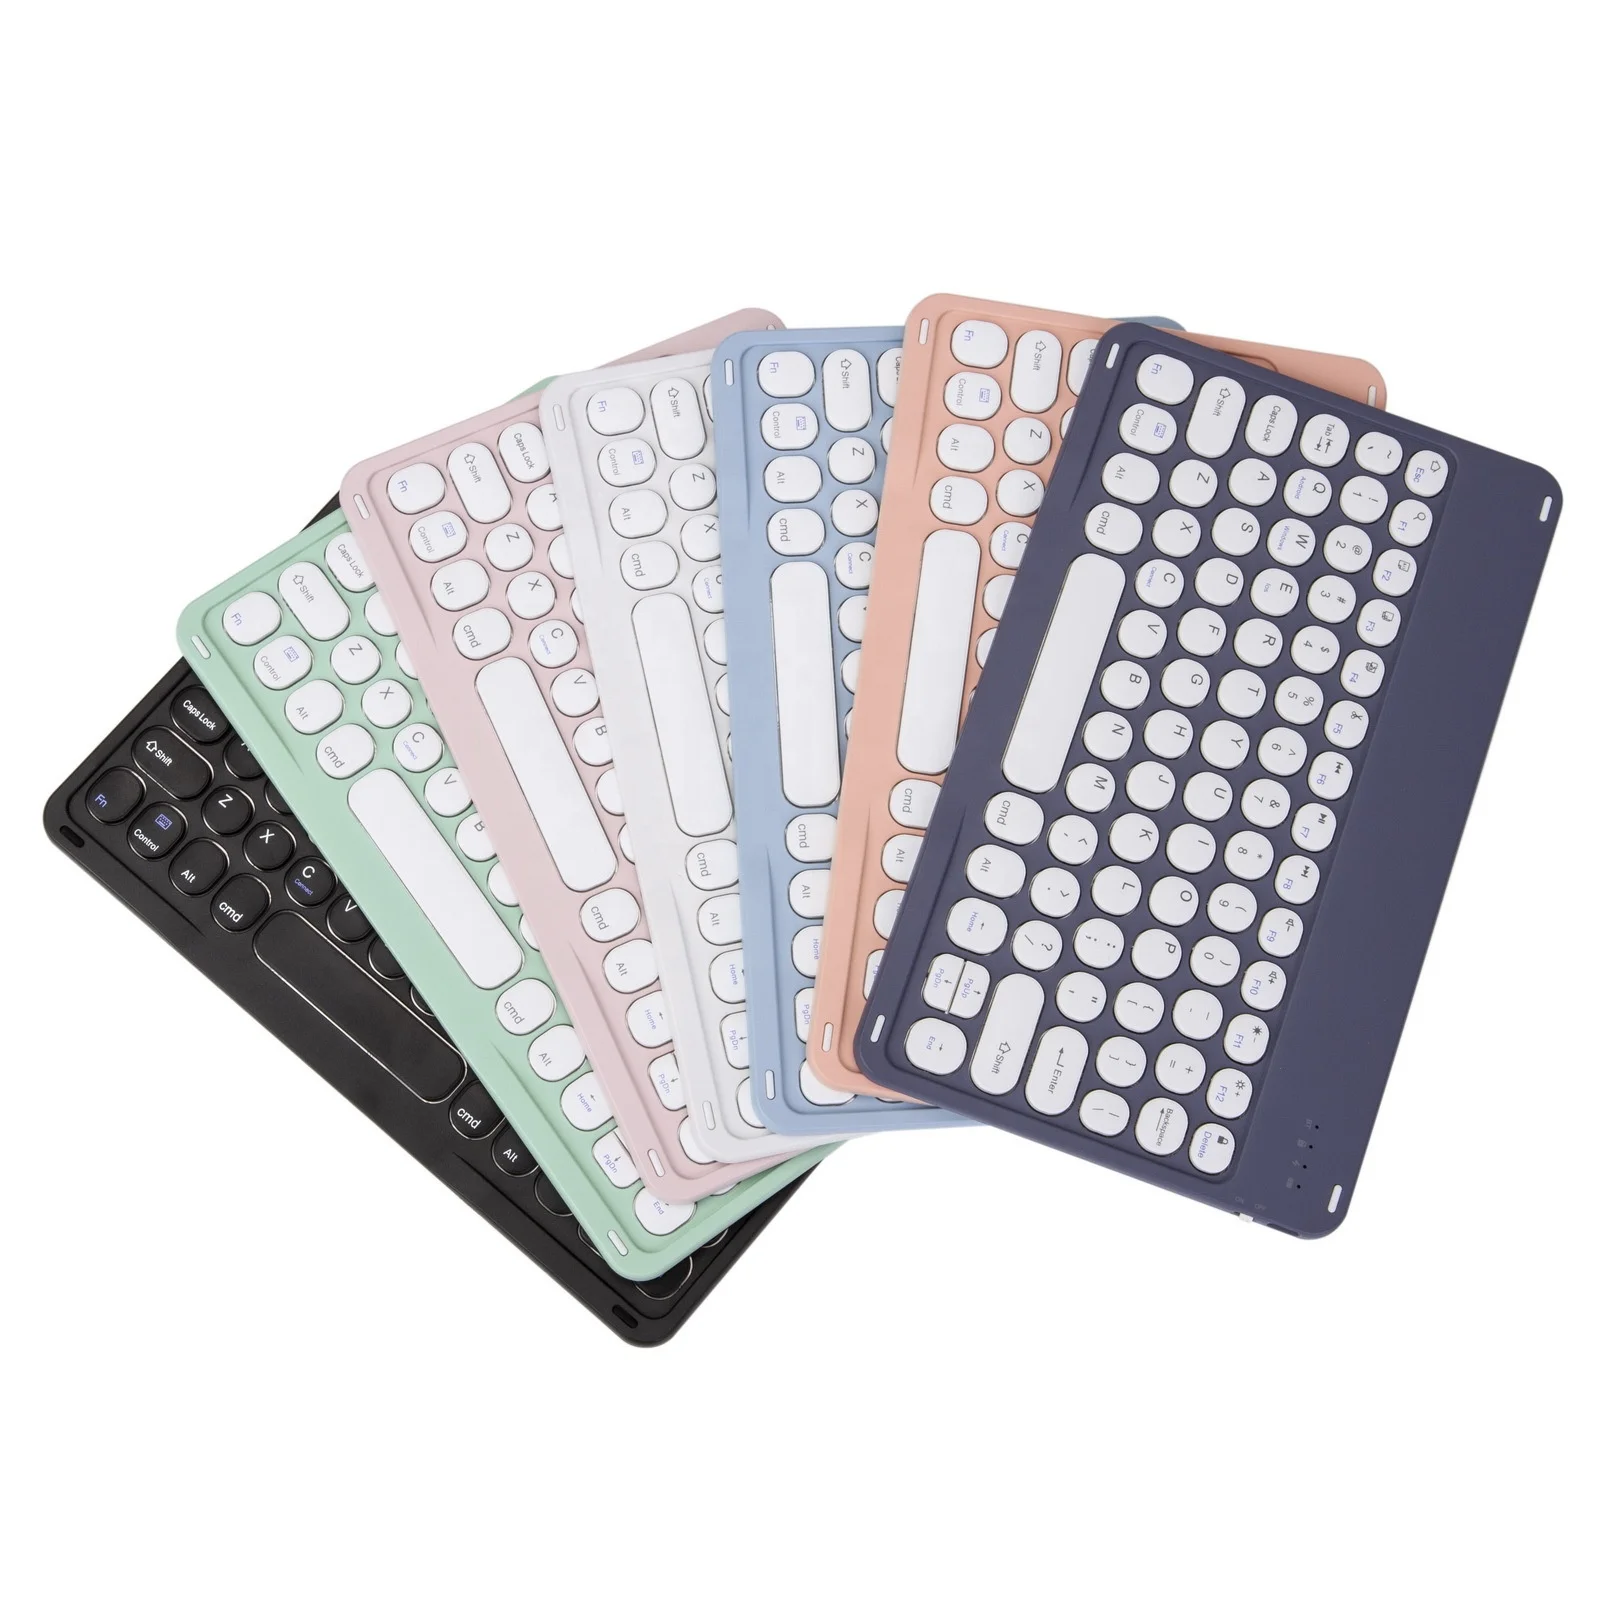 

Multi-device Wireless Keyboard Mini 78 Keys For Tablet Phone Universal Portable Blue Tooth Keypad For Iphone